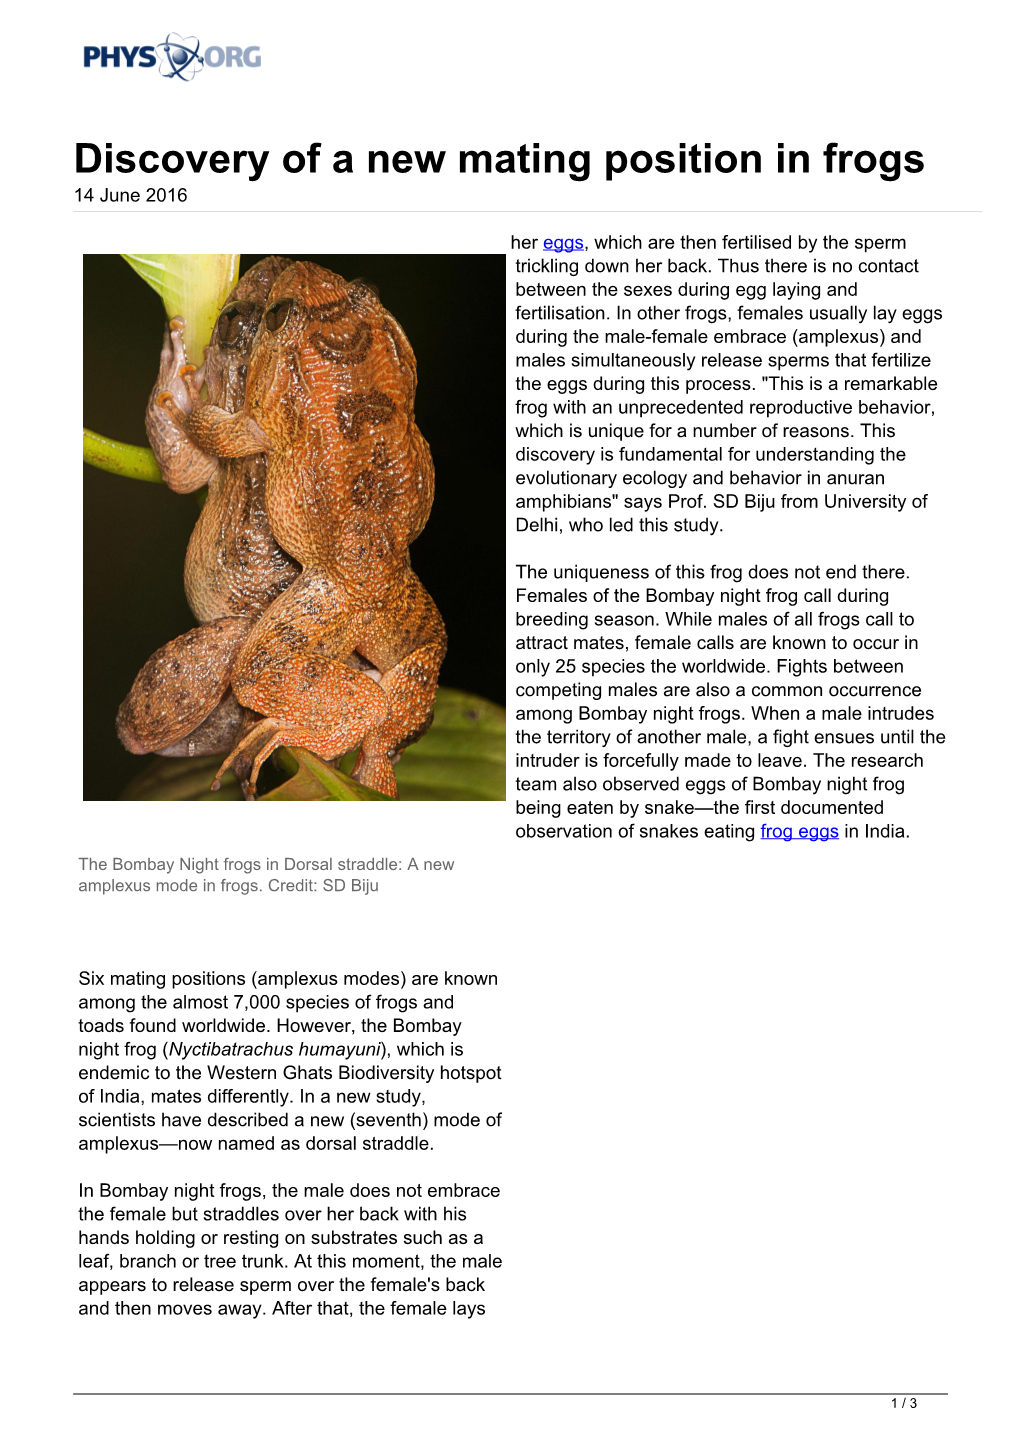 Discovery of a New Mating Position in Frogs 14 June 2016